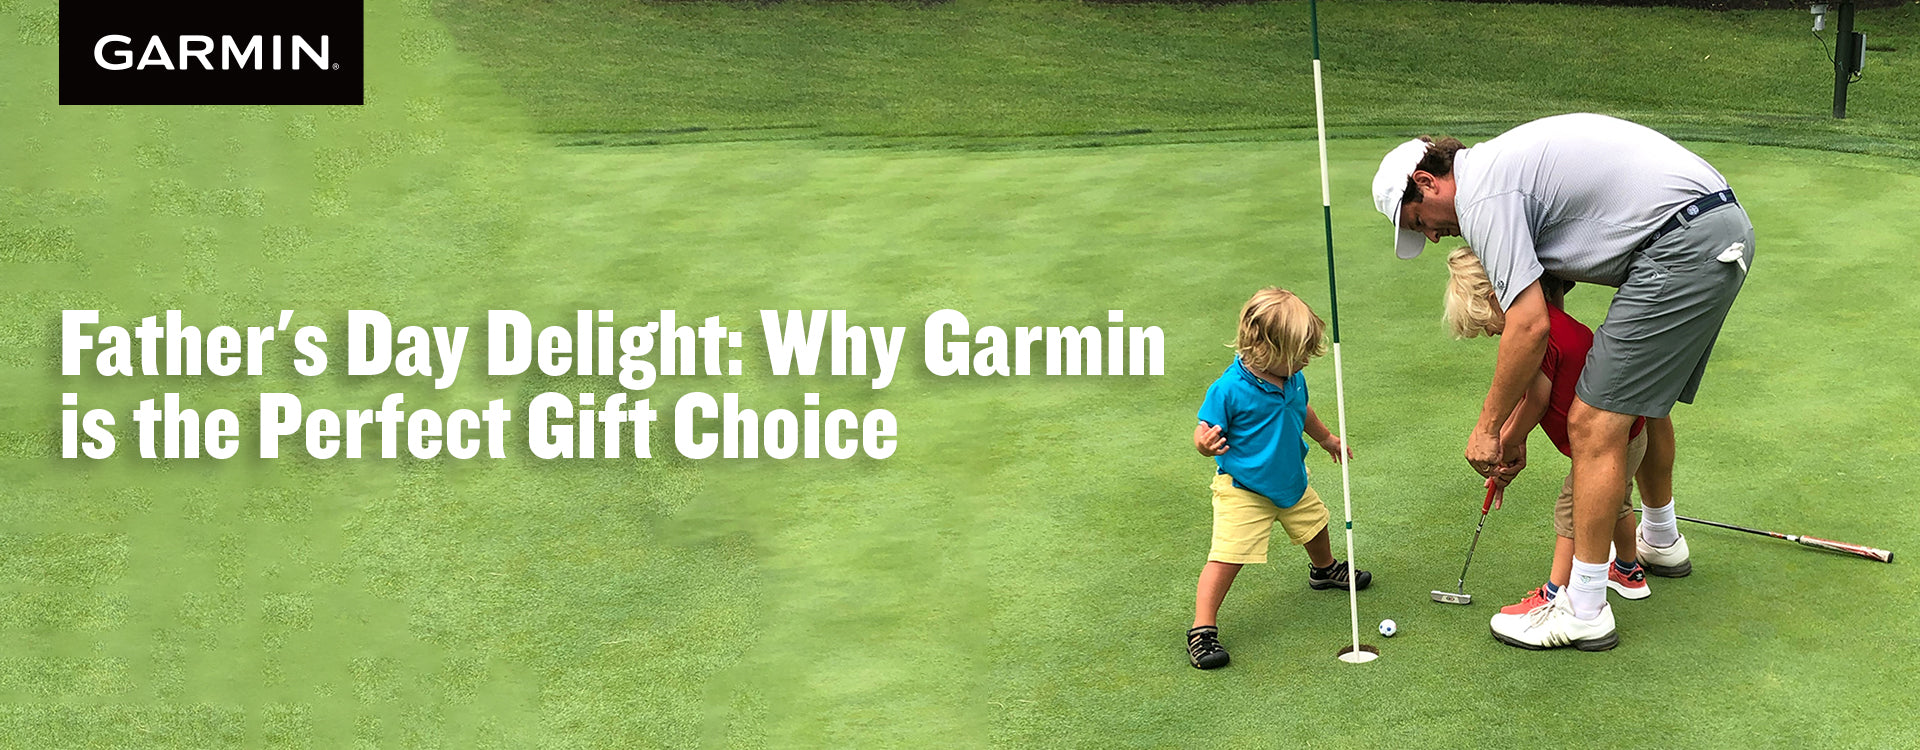 Father's Day Delight: Why Garmin is the Perfect Gift Choice